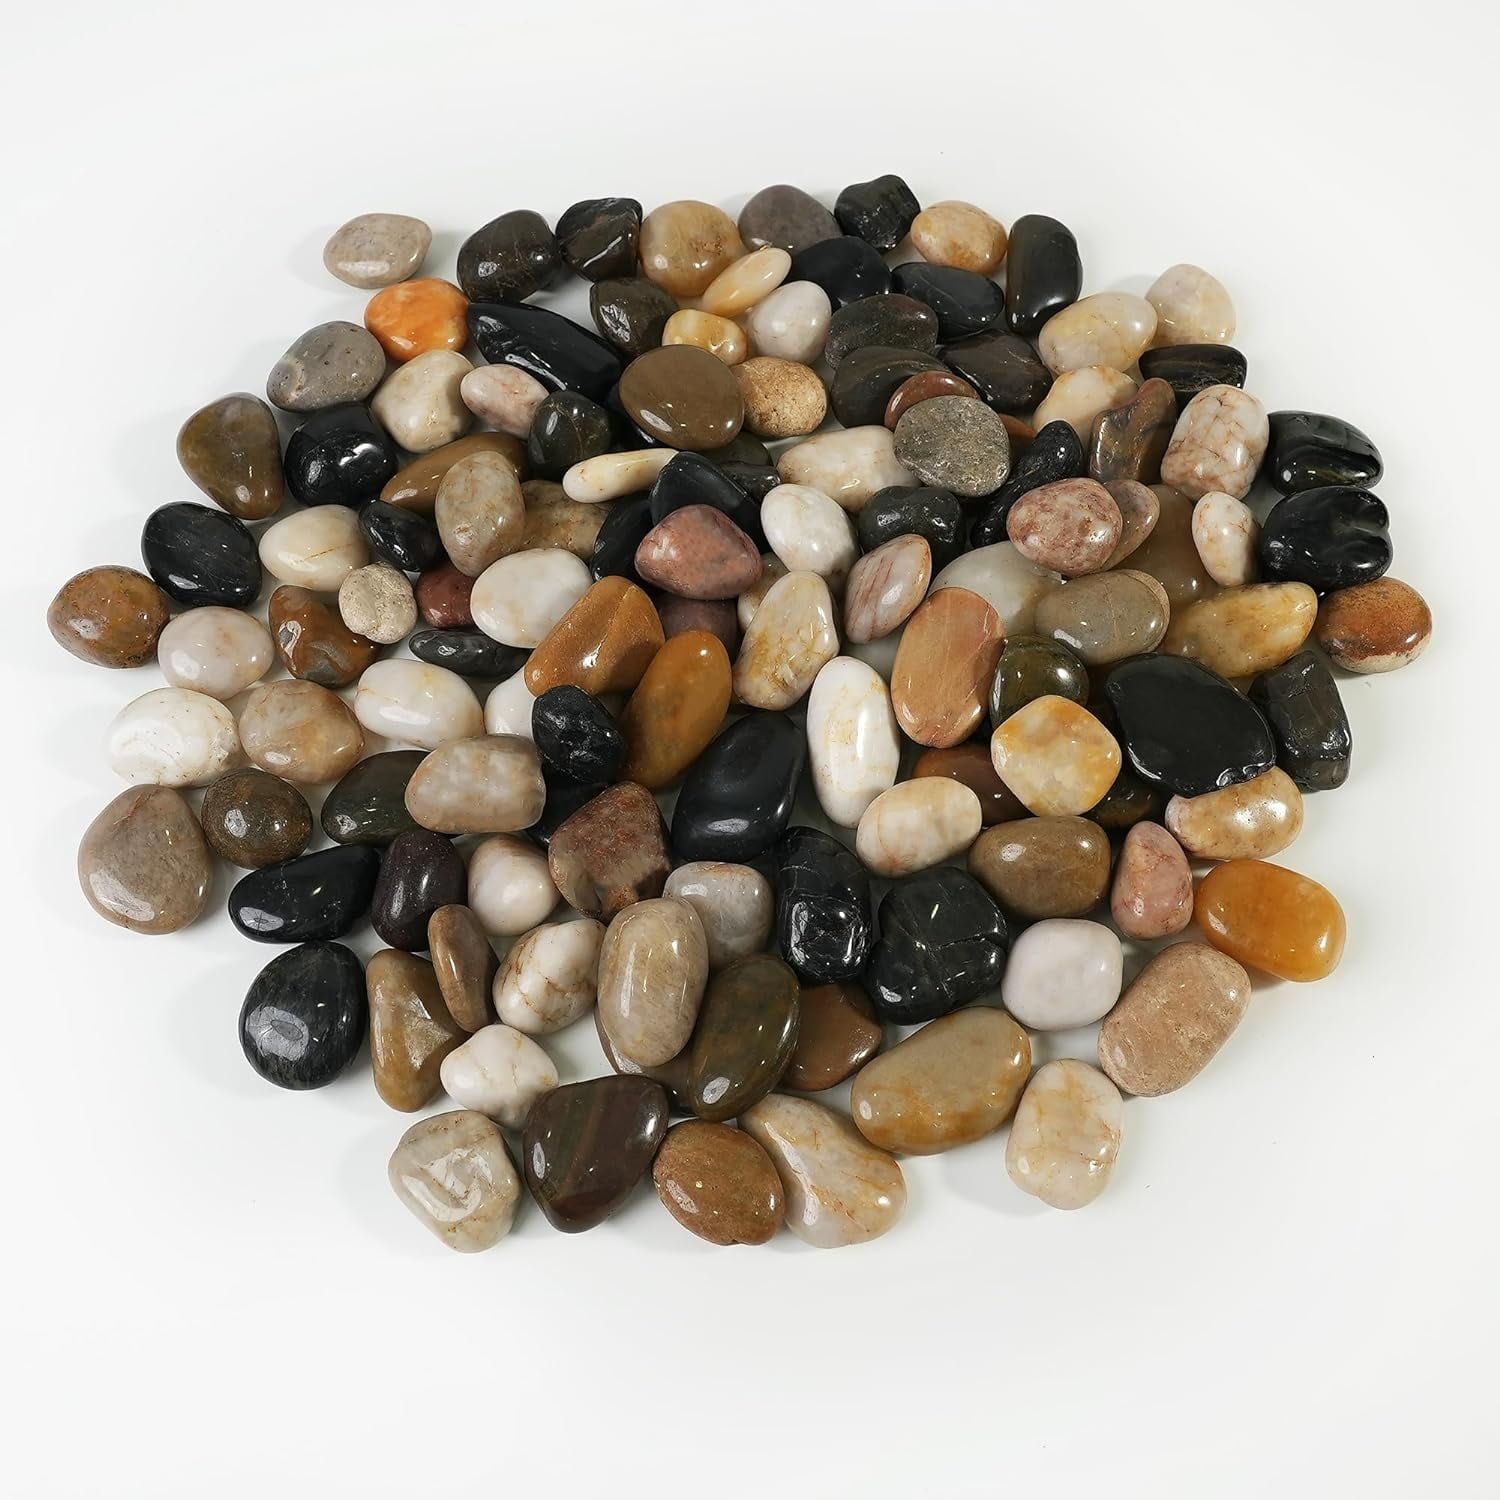 2.5 Pounds River Rock Stones, Natural Decorative Polished Mixed